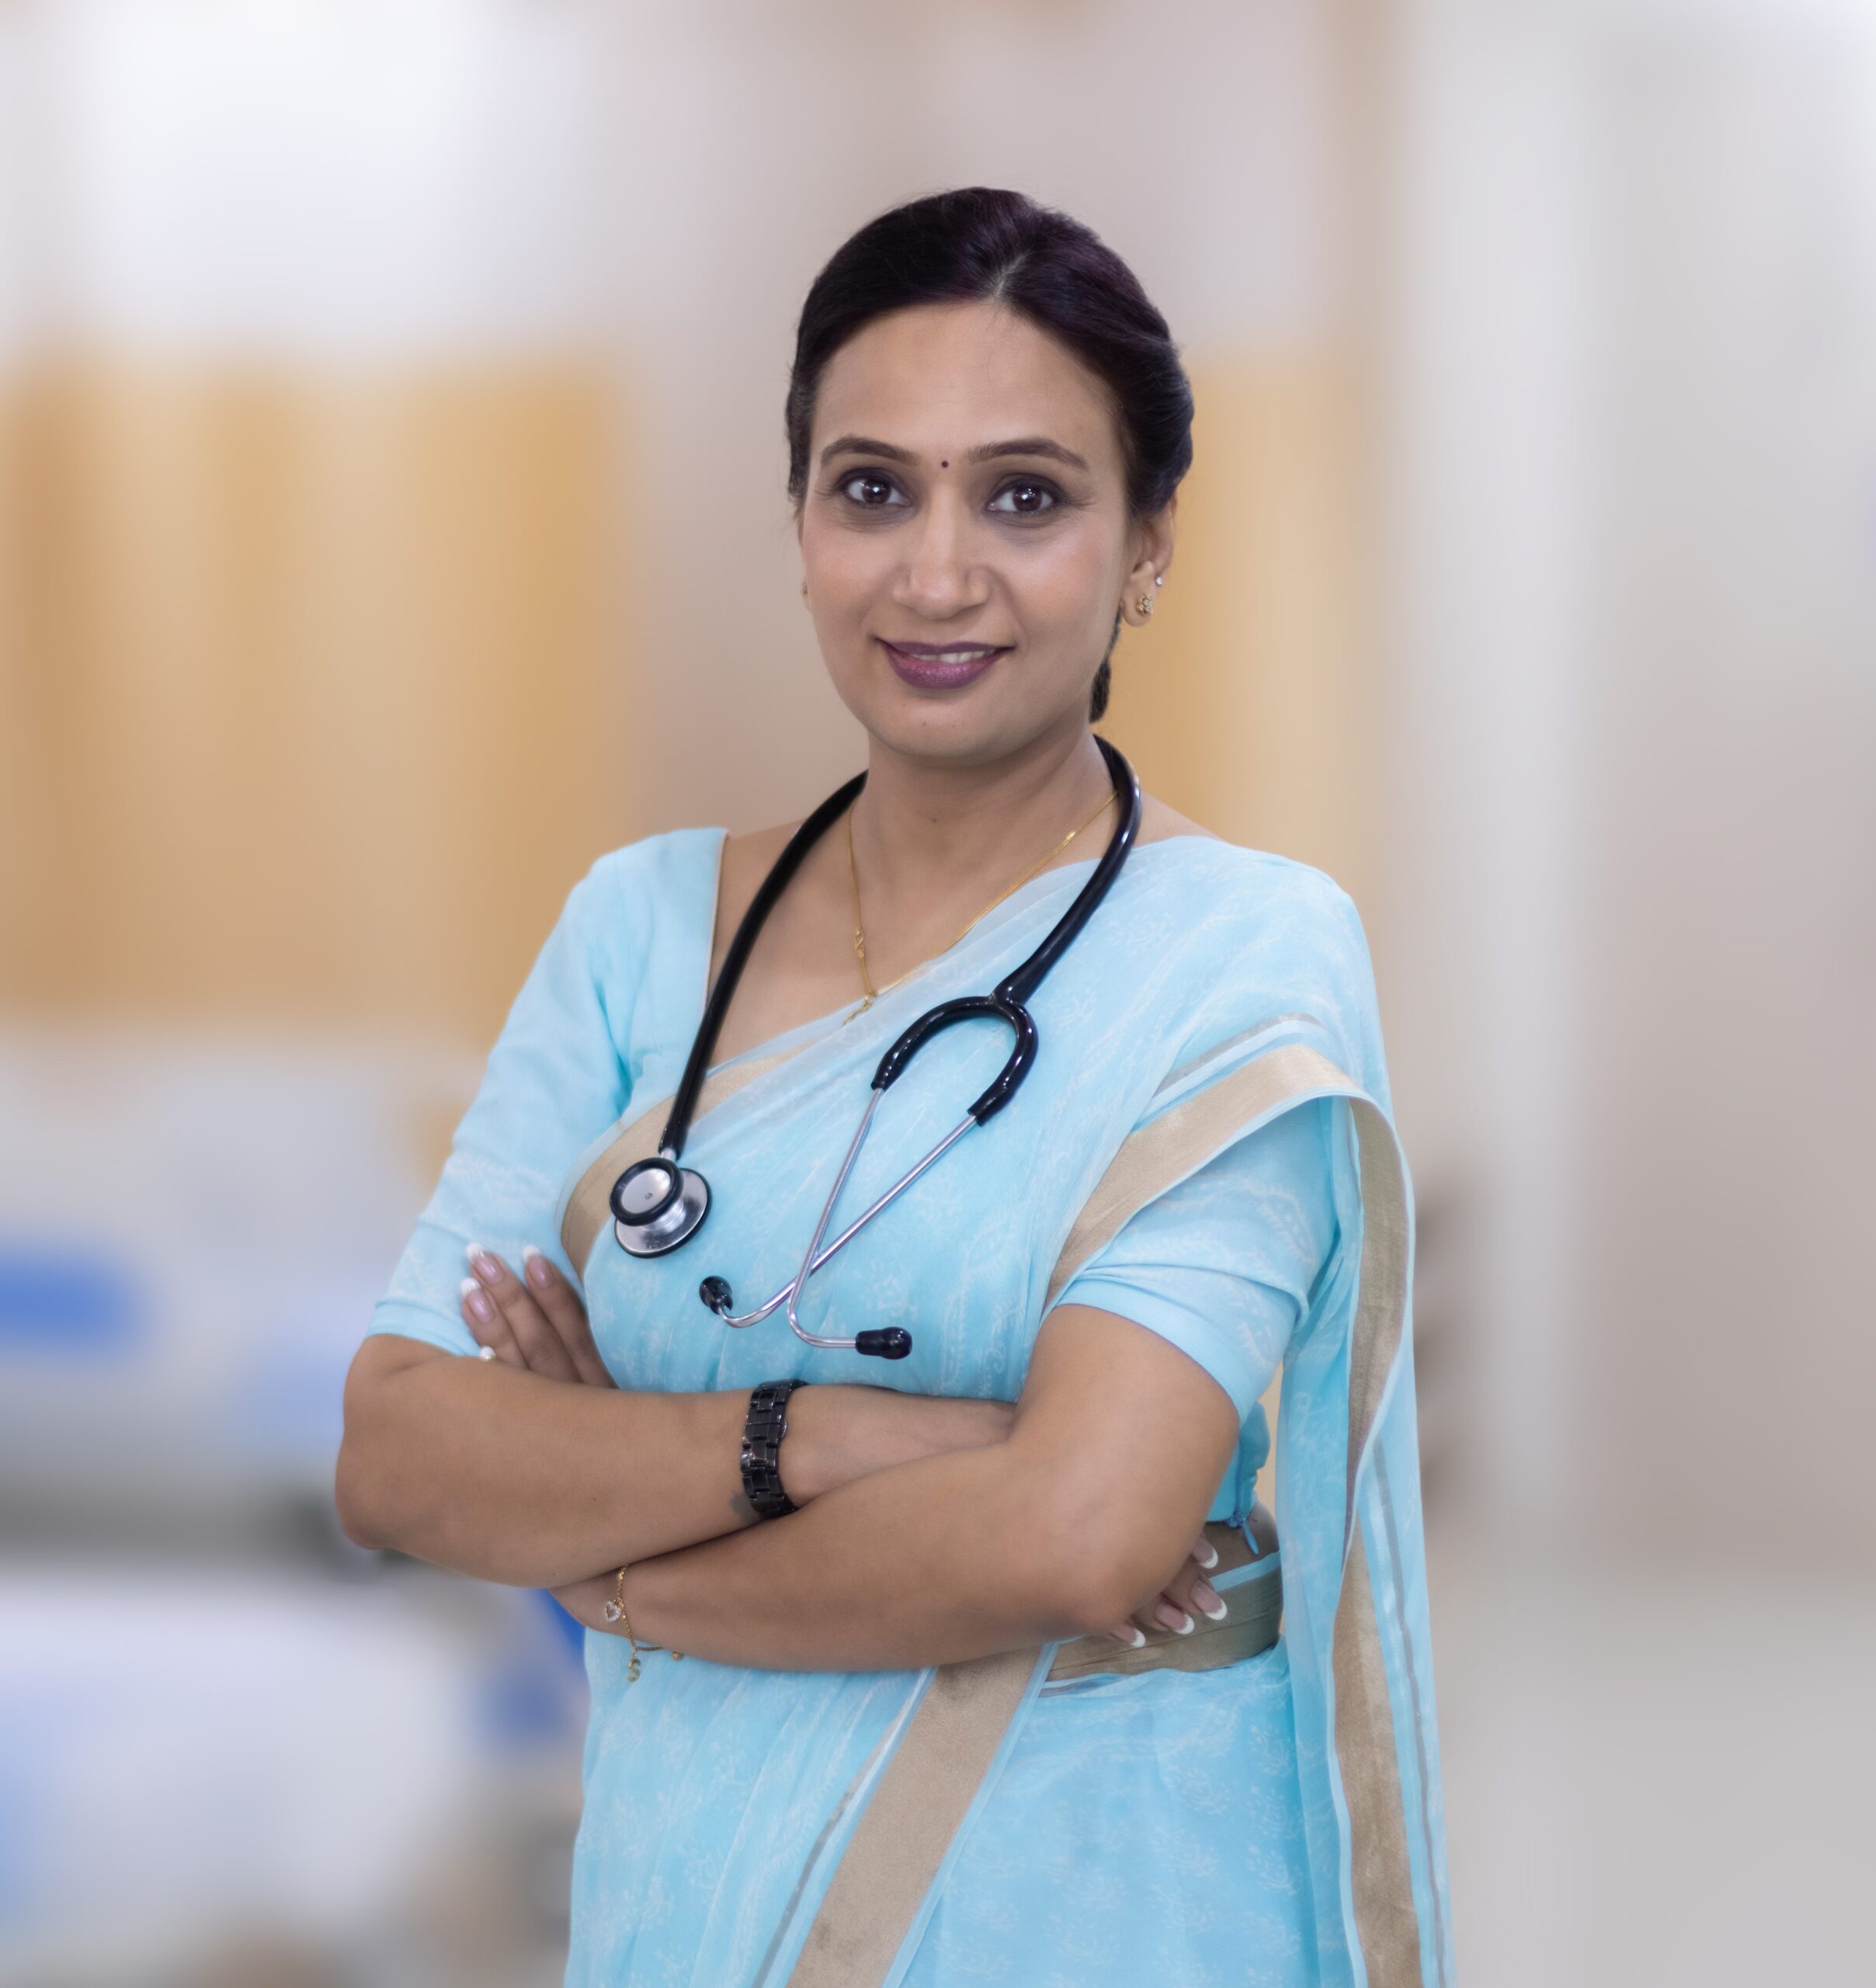 Smiling female Indian doctor in light blue sari with a stethoscope around her neck.